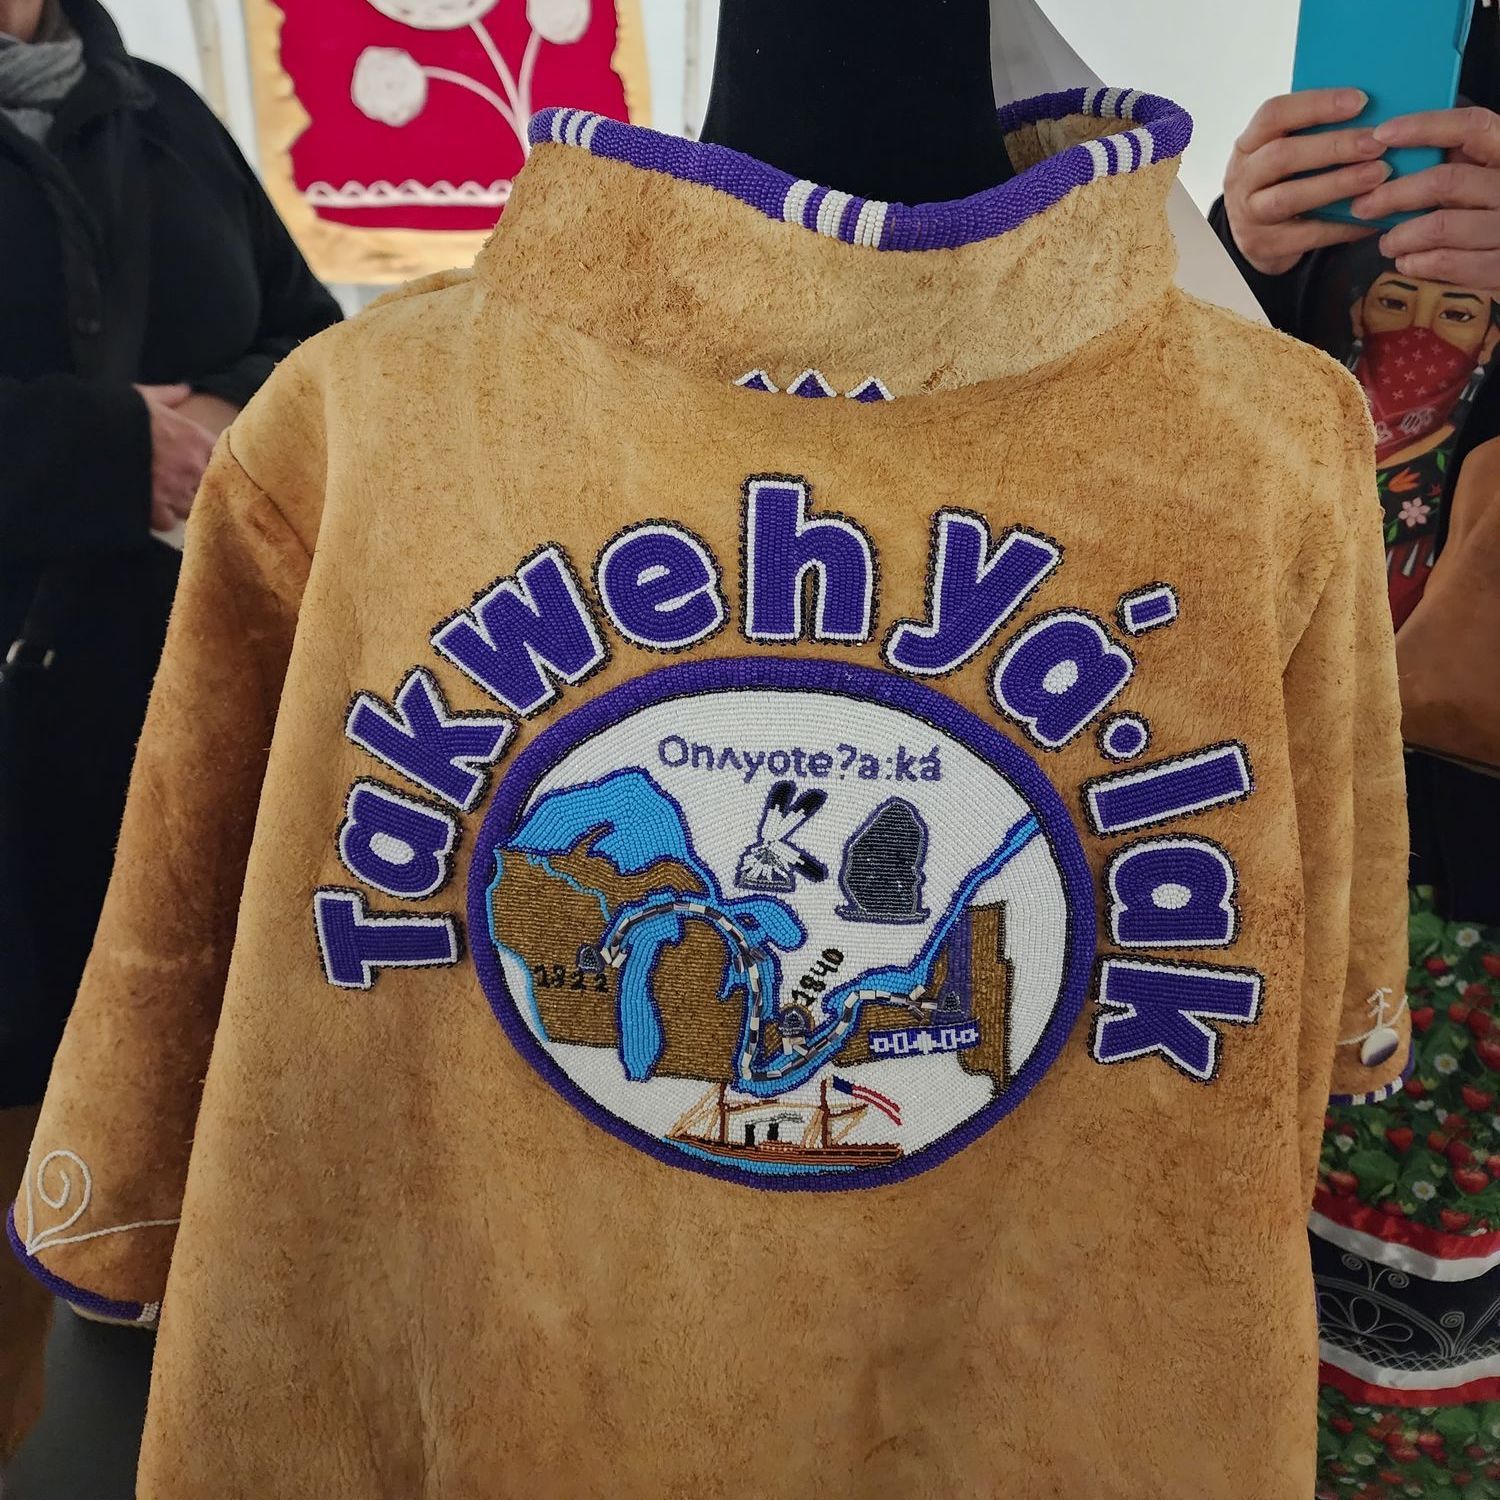 The back view of the jacket has beaded patch showing a journey through  the Great Lakes using quahog shell, also known as wampum beads, via steamboat